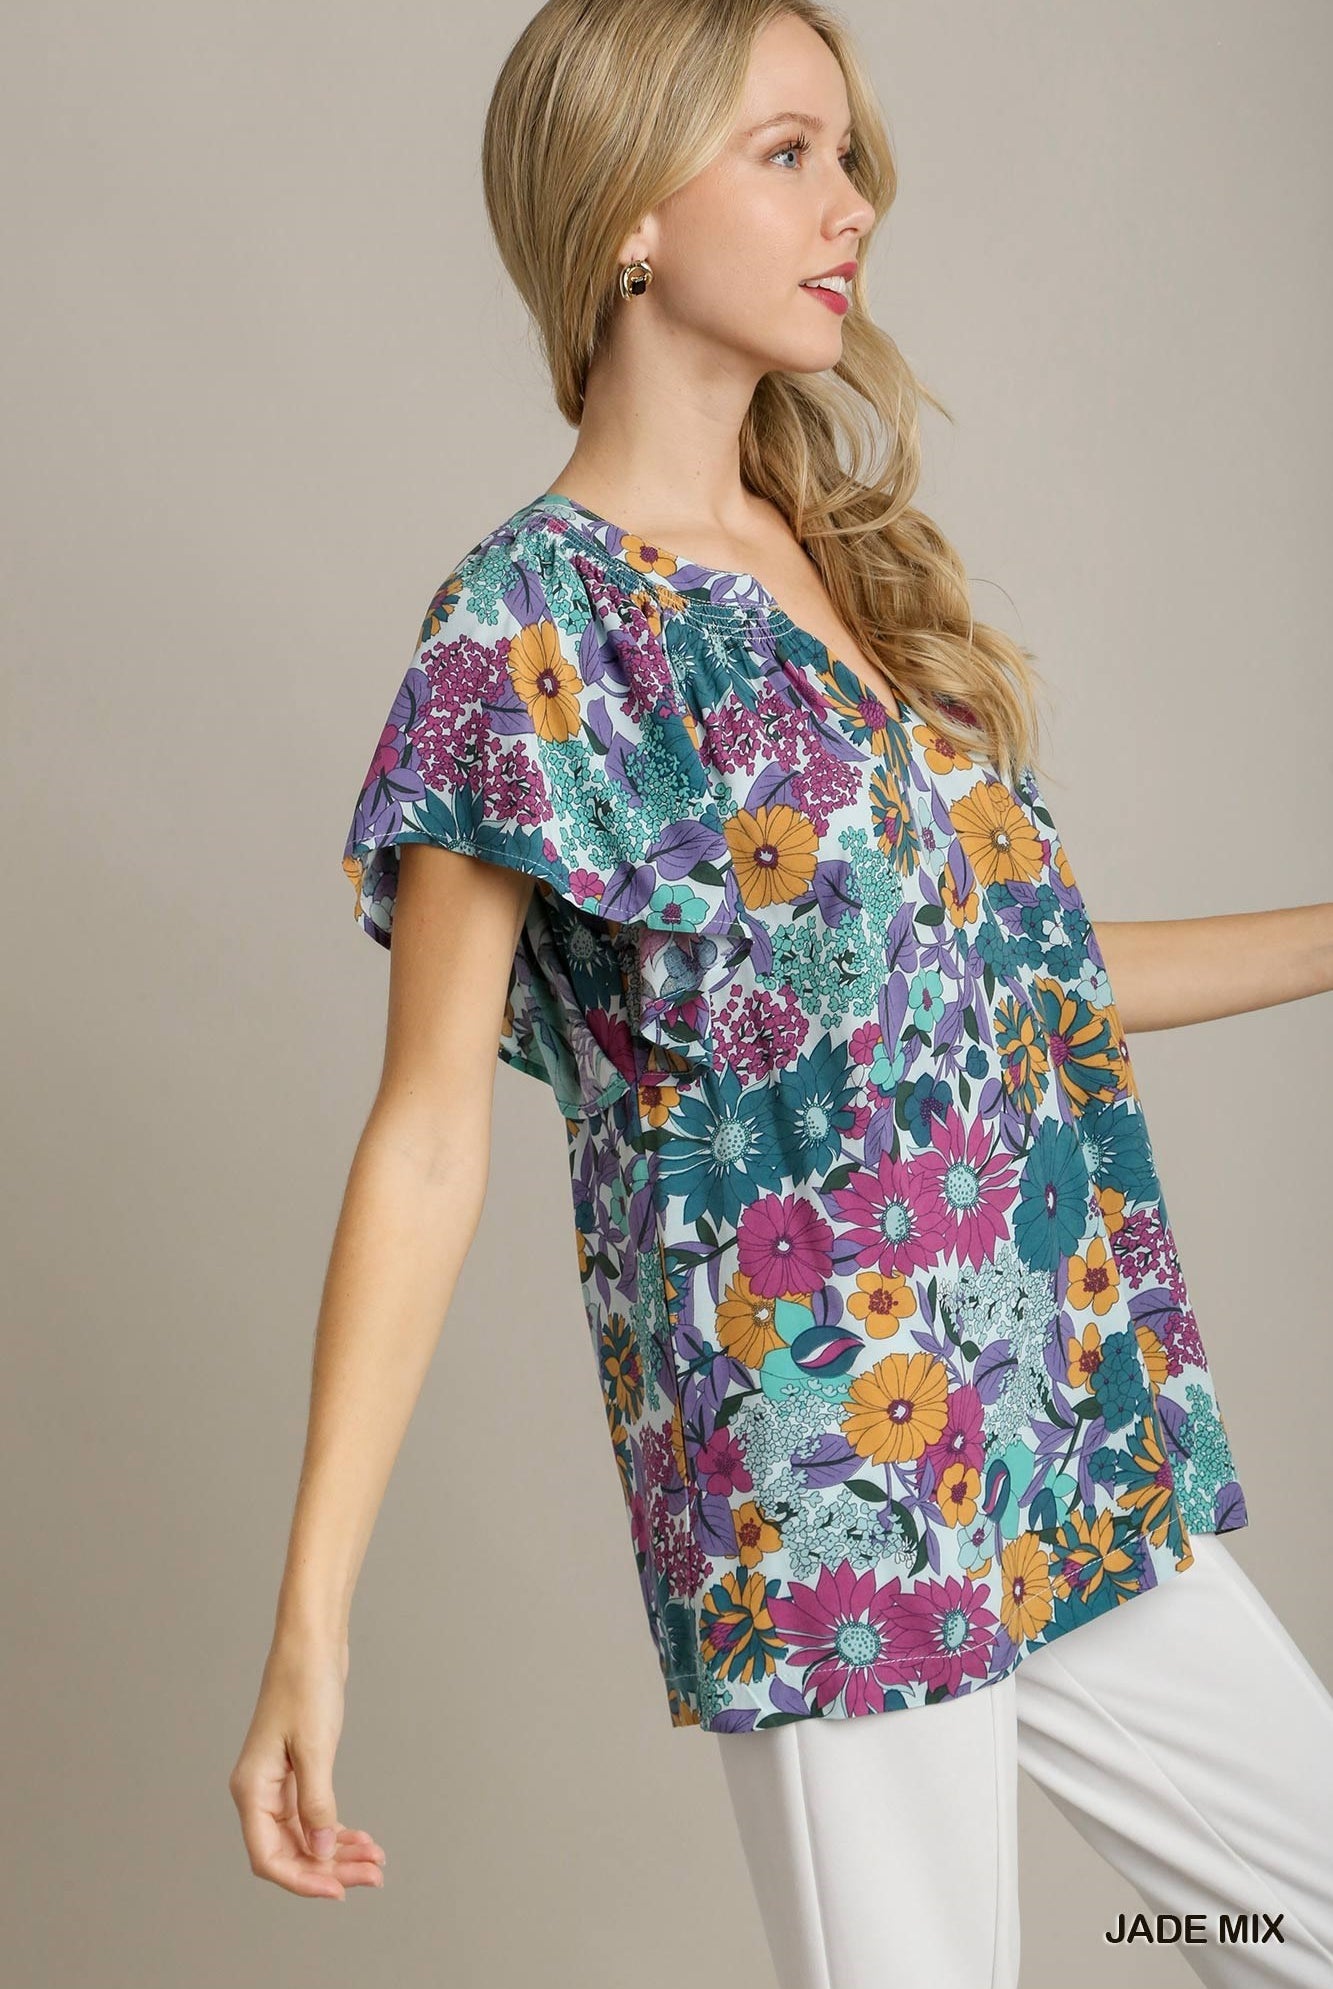 JADE MIX BOXY CUT FLORAL COLORFUL TOP / STUFFOLOGY BOUTIQUE-Top-Umgee-Stuffology - Where Vintage Meets Modern, A Boutique for Real Women in Crosbyton, TX